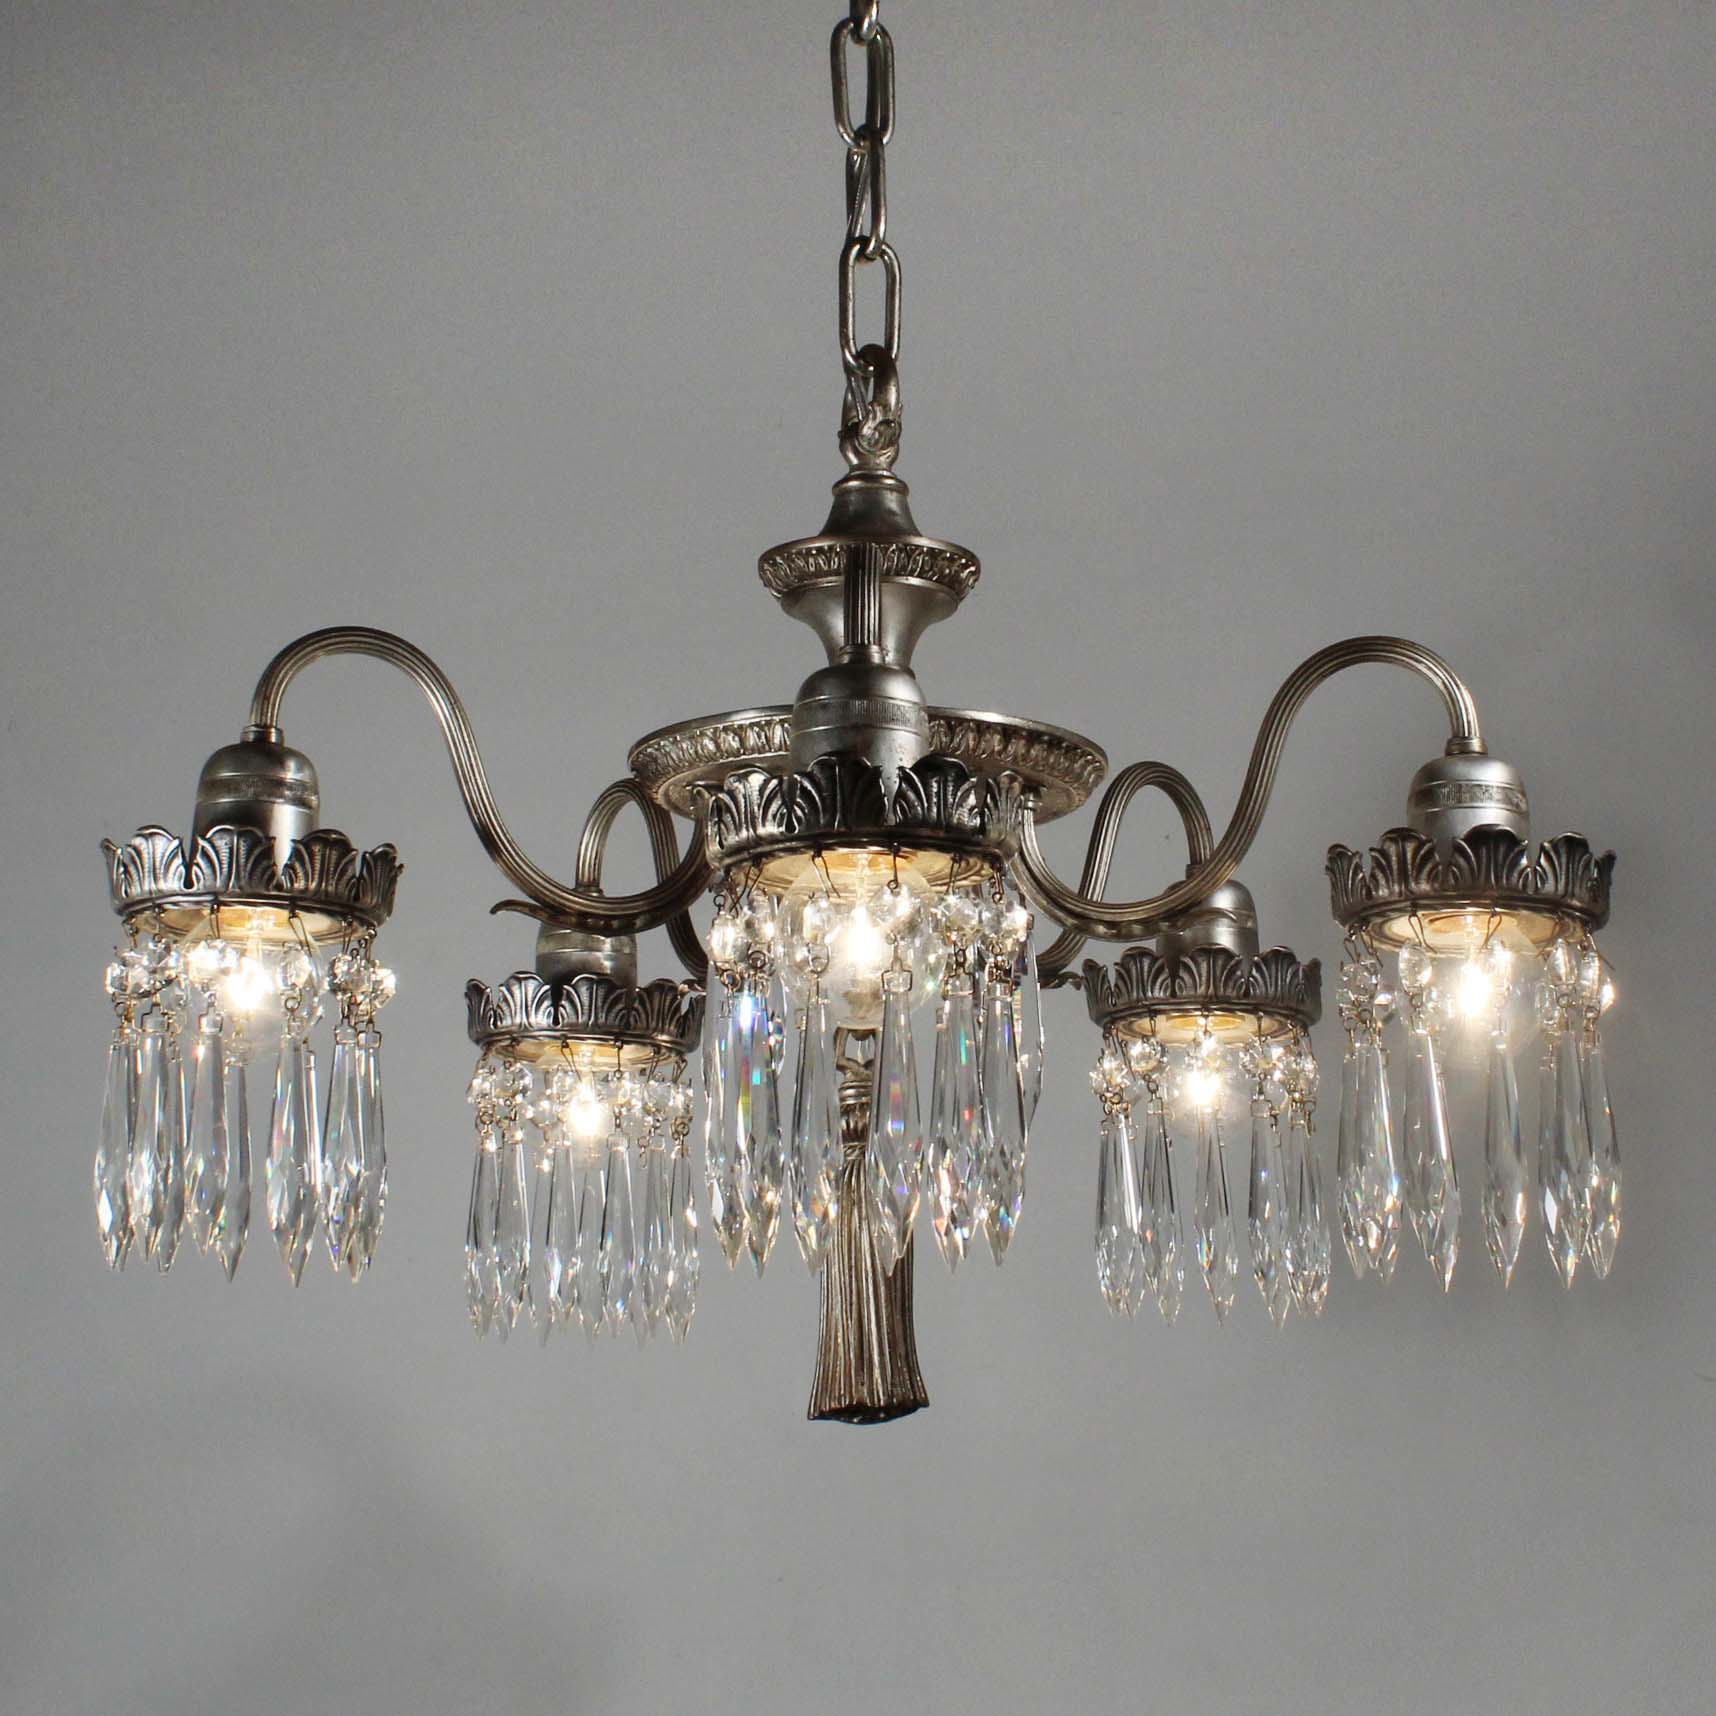 SOLD Antique Neoclassical Silver Plate Chandelier with Prisms-71840